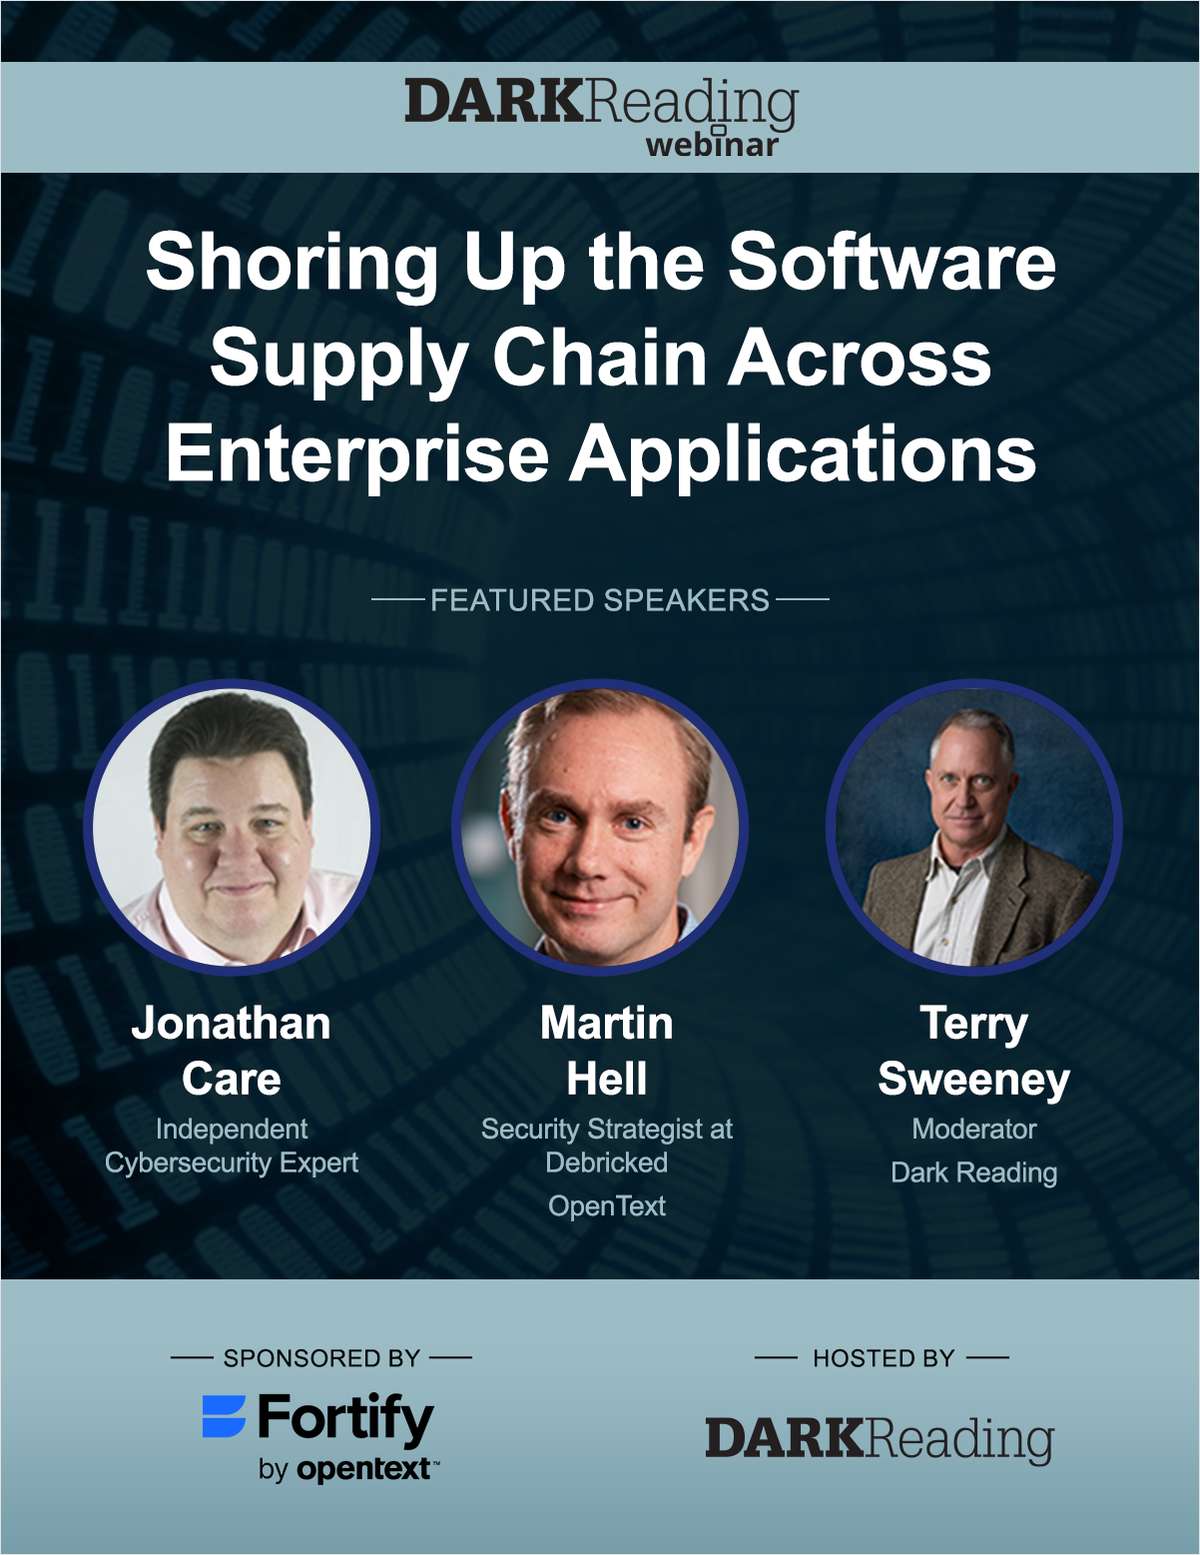 Shoring Up the Software Supply Chain Across Enterprise Applications